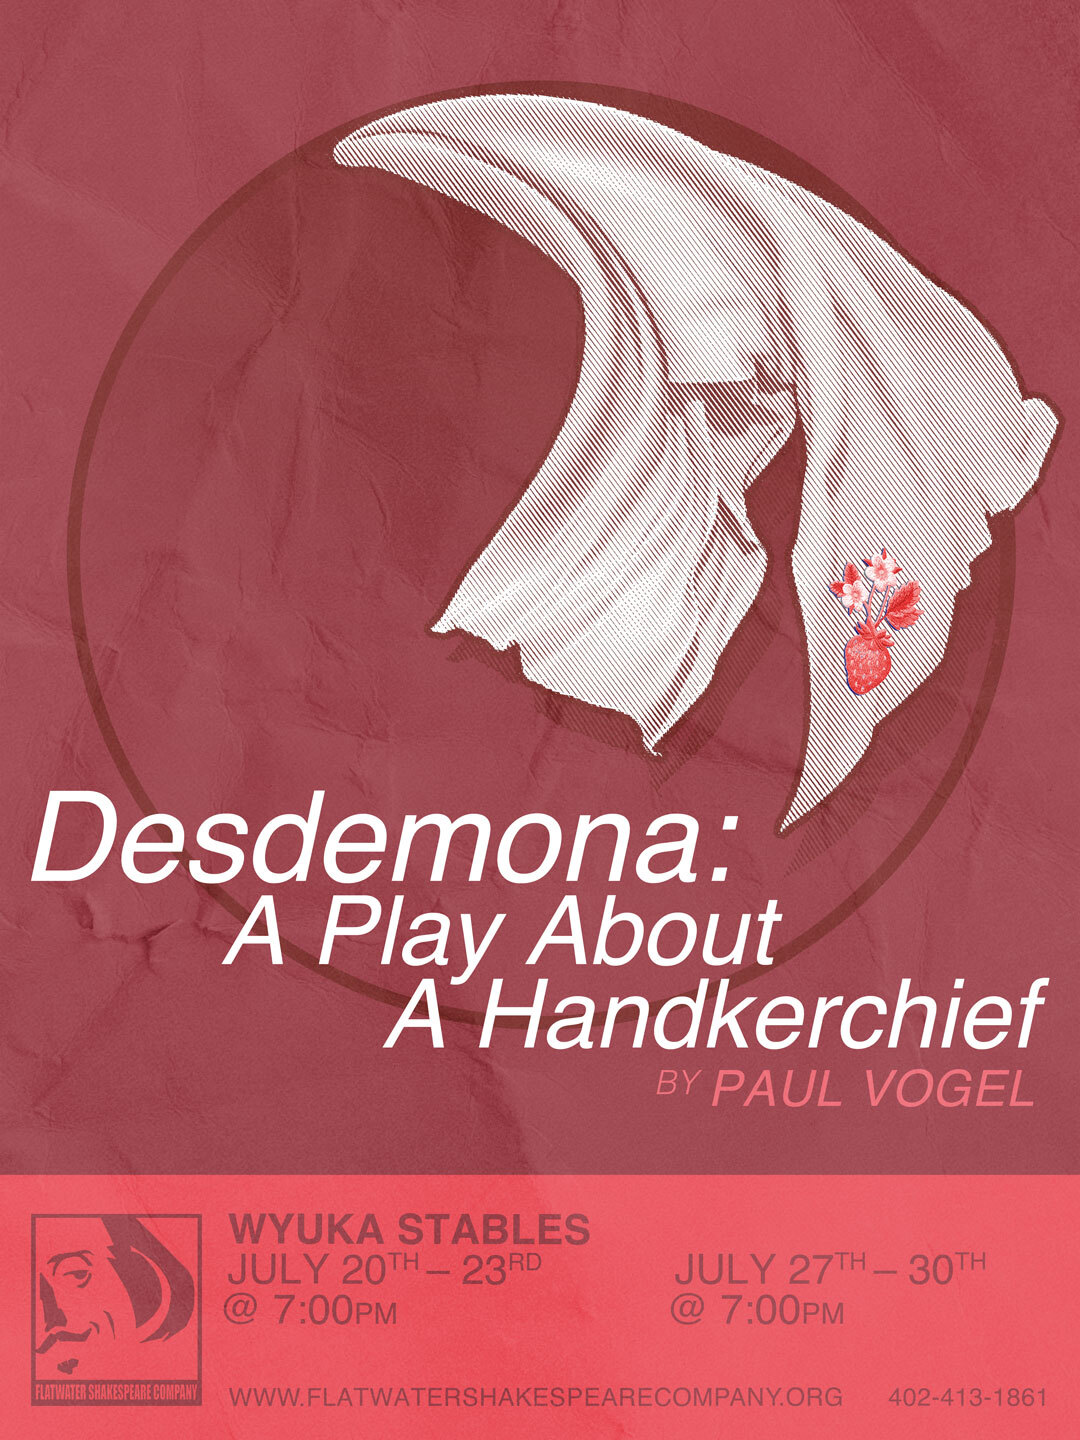 7/21 ADU - ADULT: Friday. July 21, 2023 | 7:00 p.m. - 10:00 p.m. CST | Wyuka Stables (Desdemona: A Play about a Handkerchief)